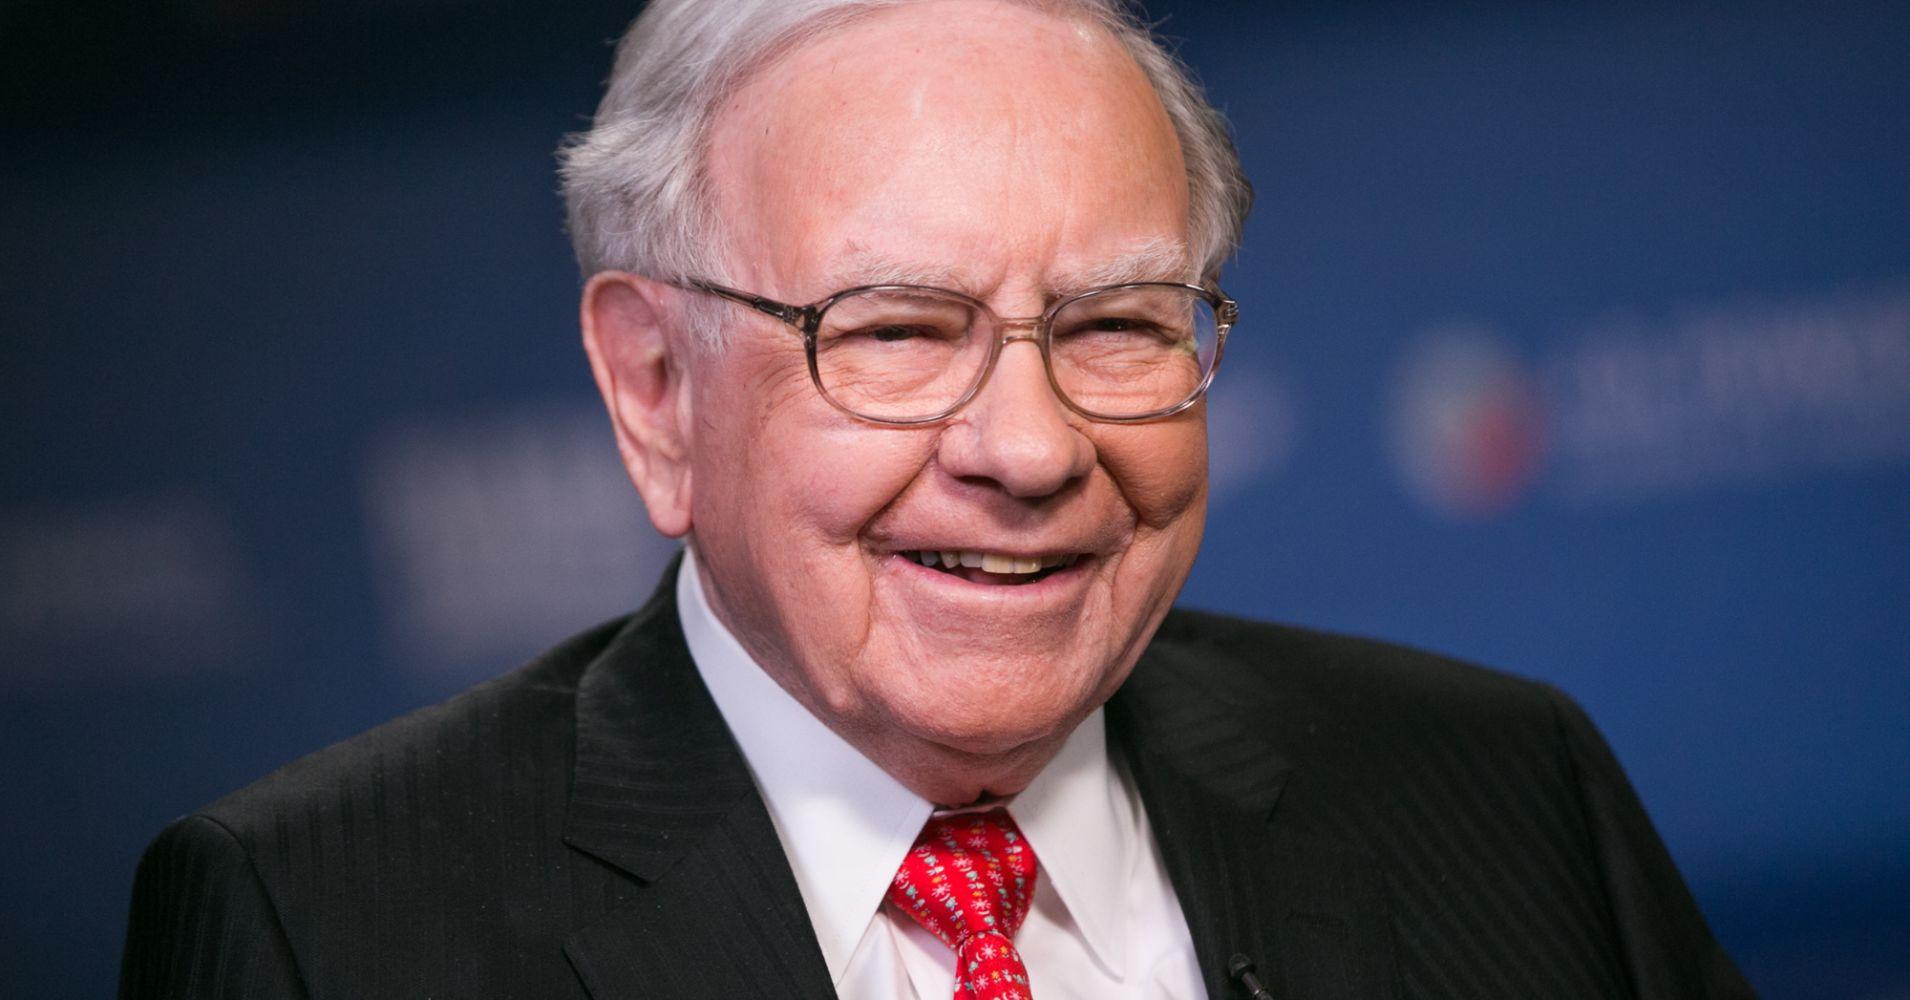 Biography of Warren Buffett and His Investment Advice